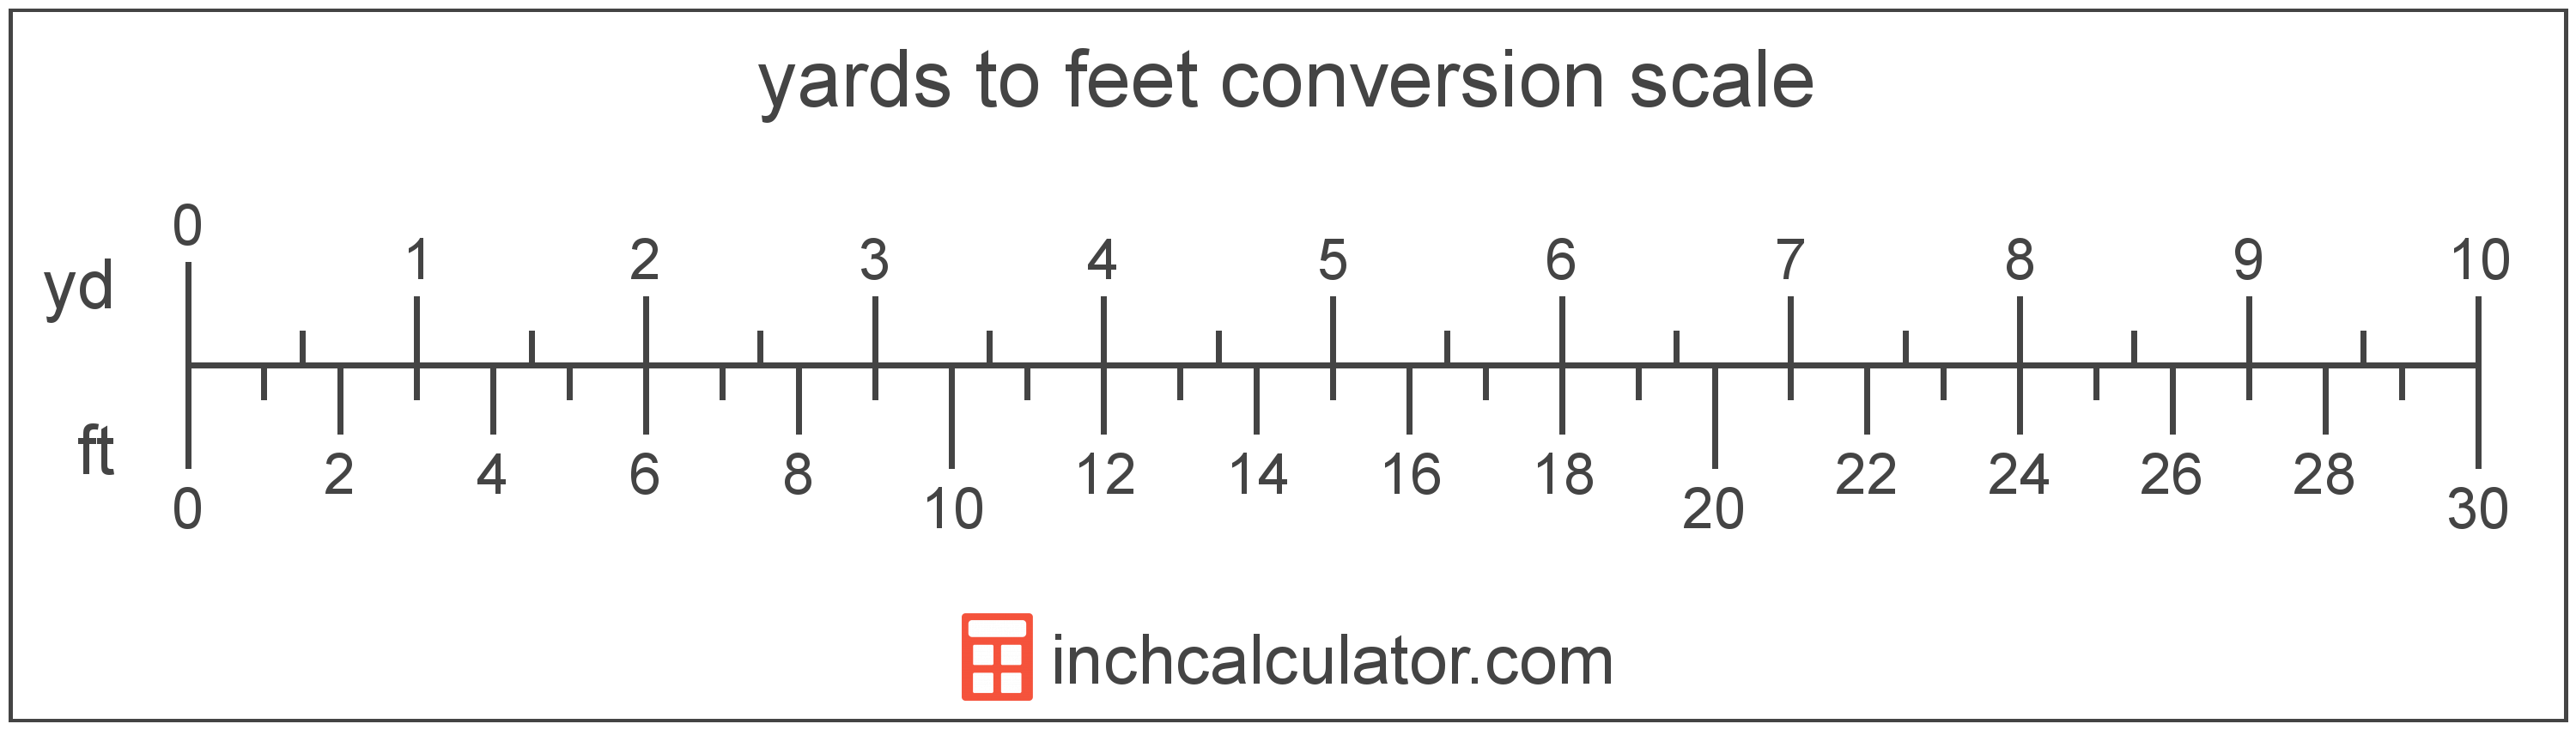 conversion scale showing feet and equivalent yards length values